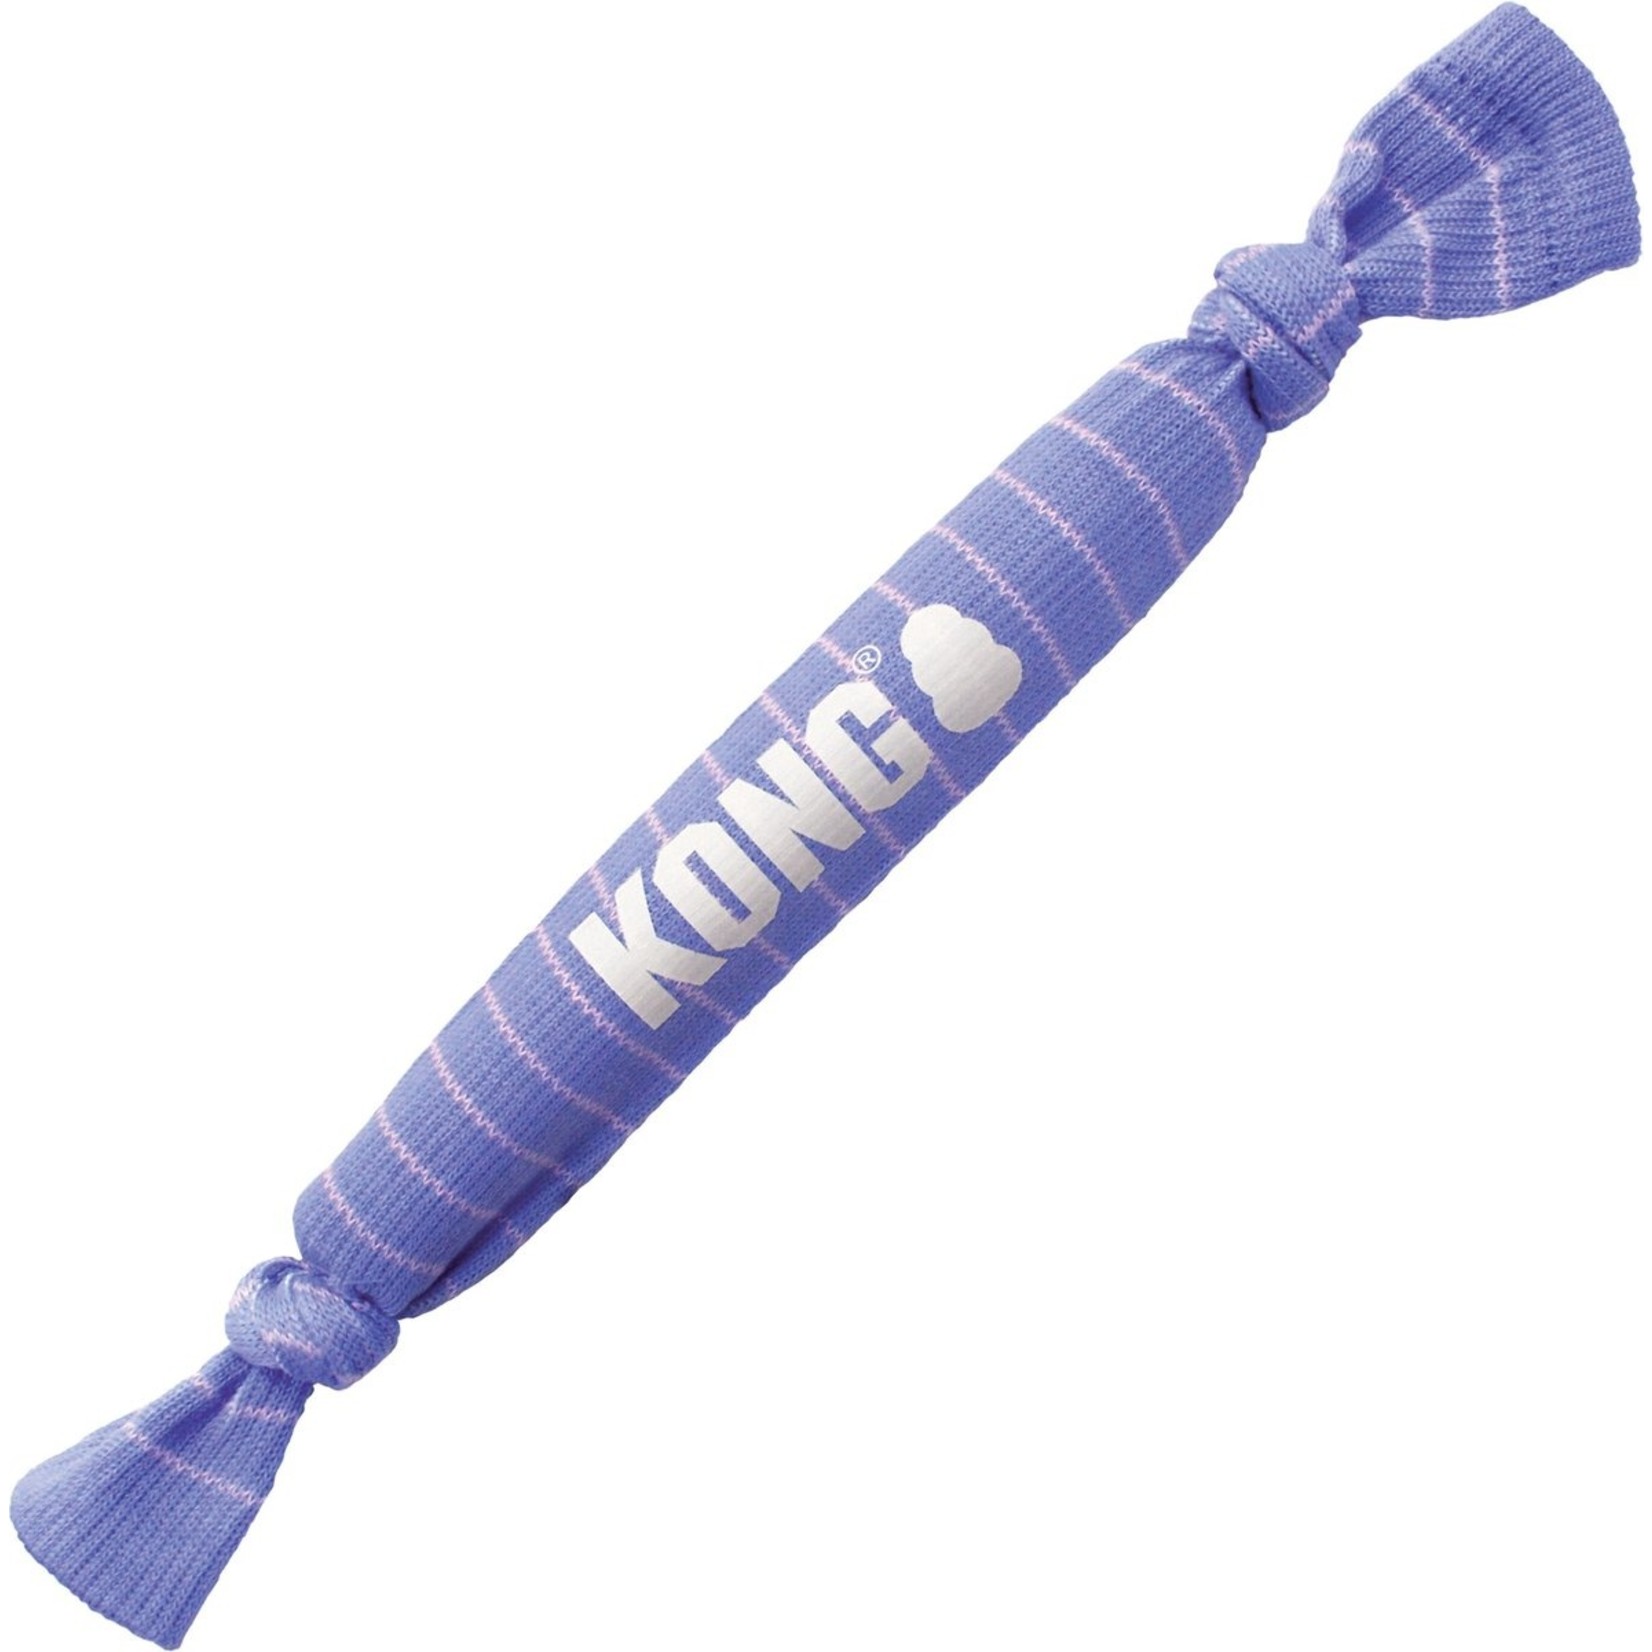 Kong Kong Dog Toy Signature Crunch Rope Single Puppy Small